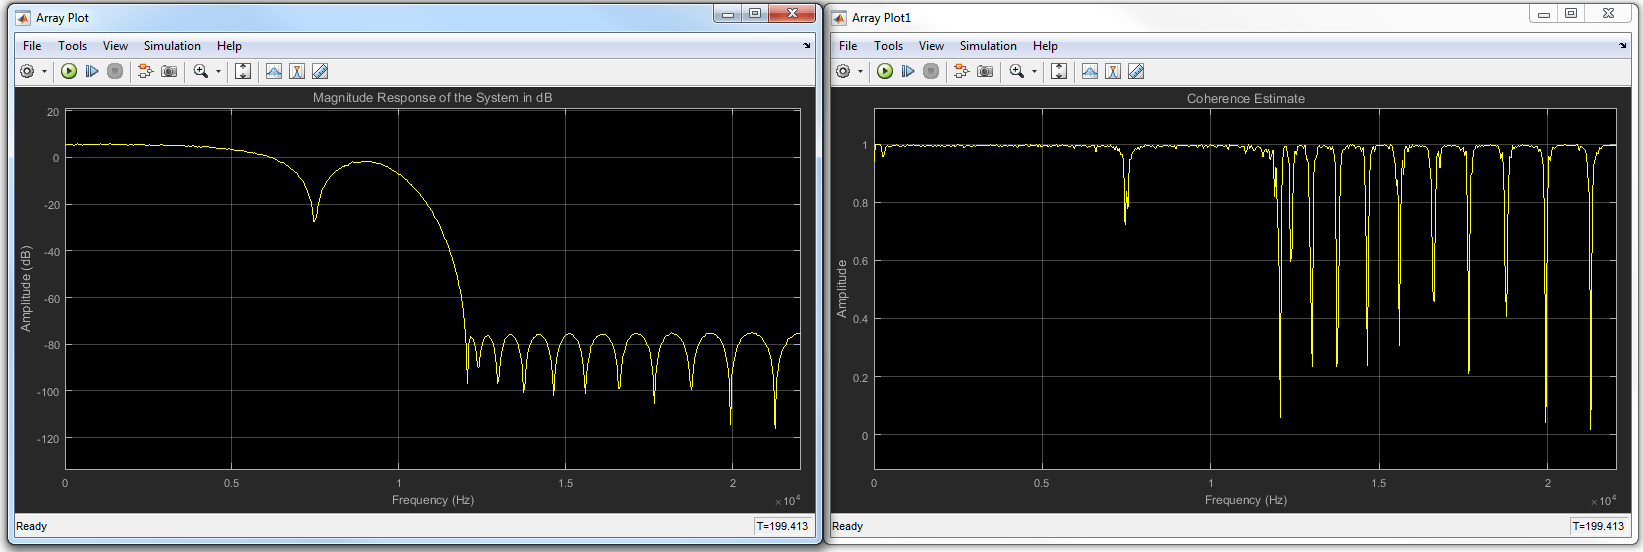 Output of the two Array Plot blocks are placed next to each other. First Array Plot block on the left shows the magnitude response of the system in dB. The second Array Plot block on the right shows the coherence estimate. The x-axis for both plots shows the frequencies in Hz, ranging from 0 to 22500 Hz.